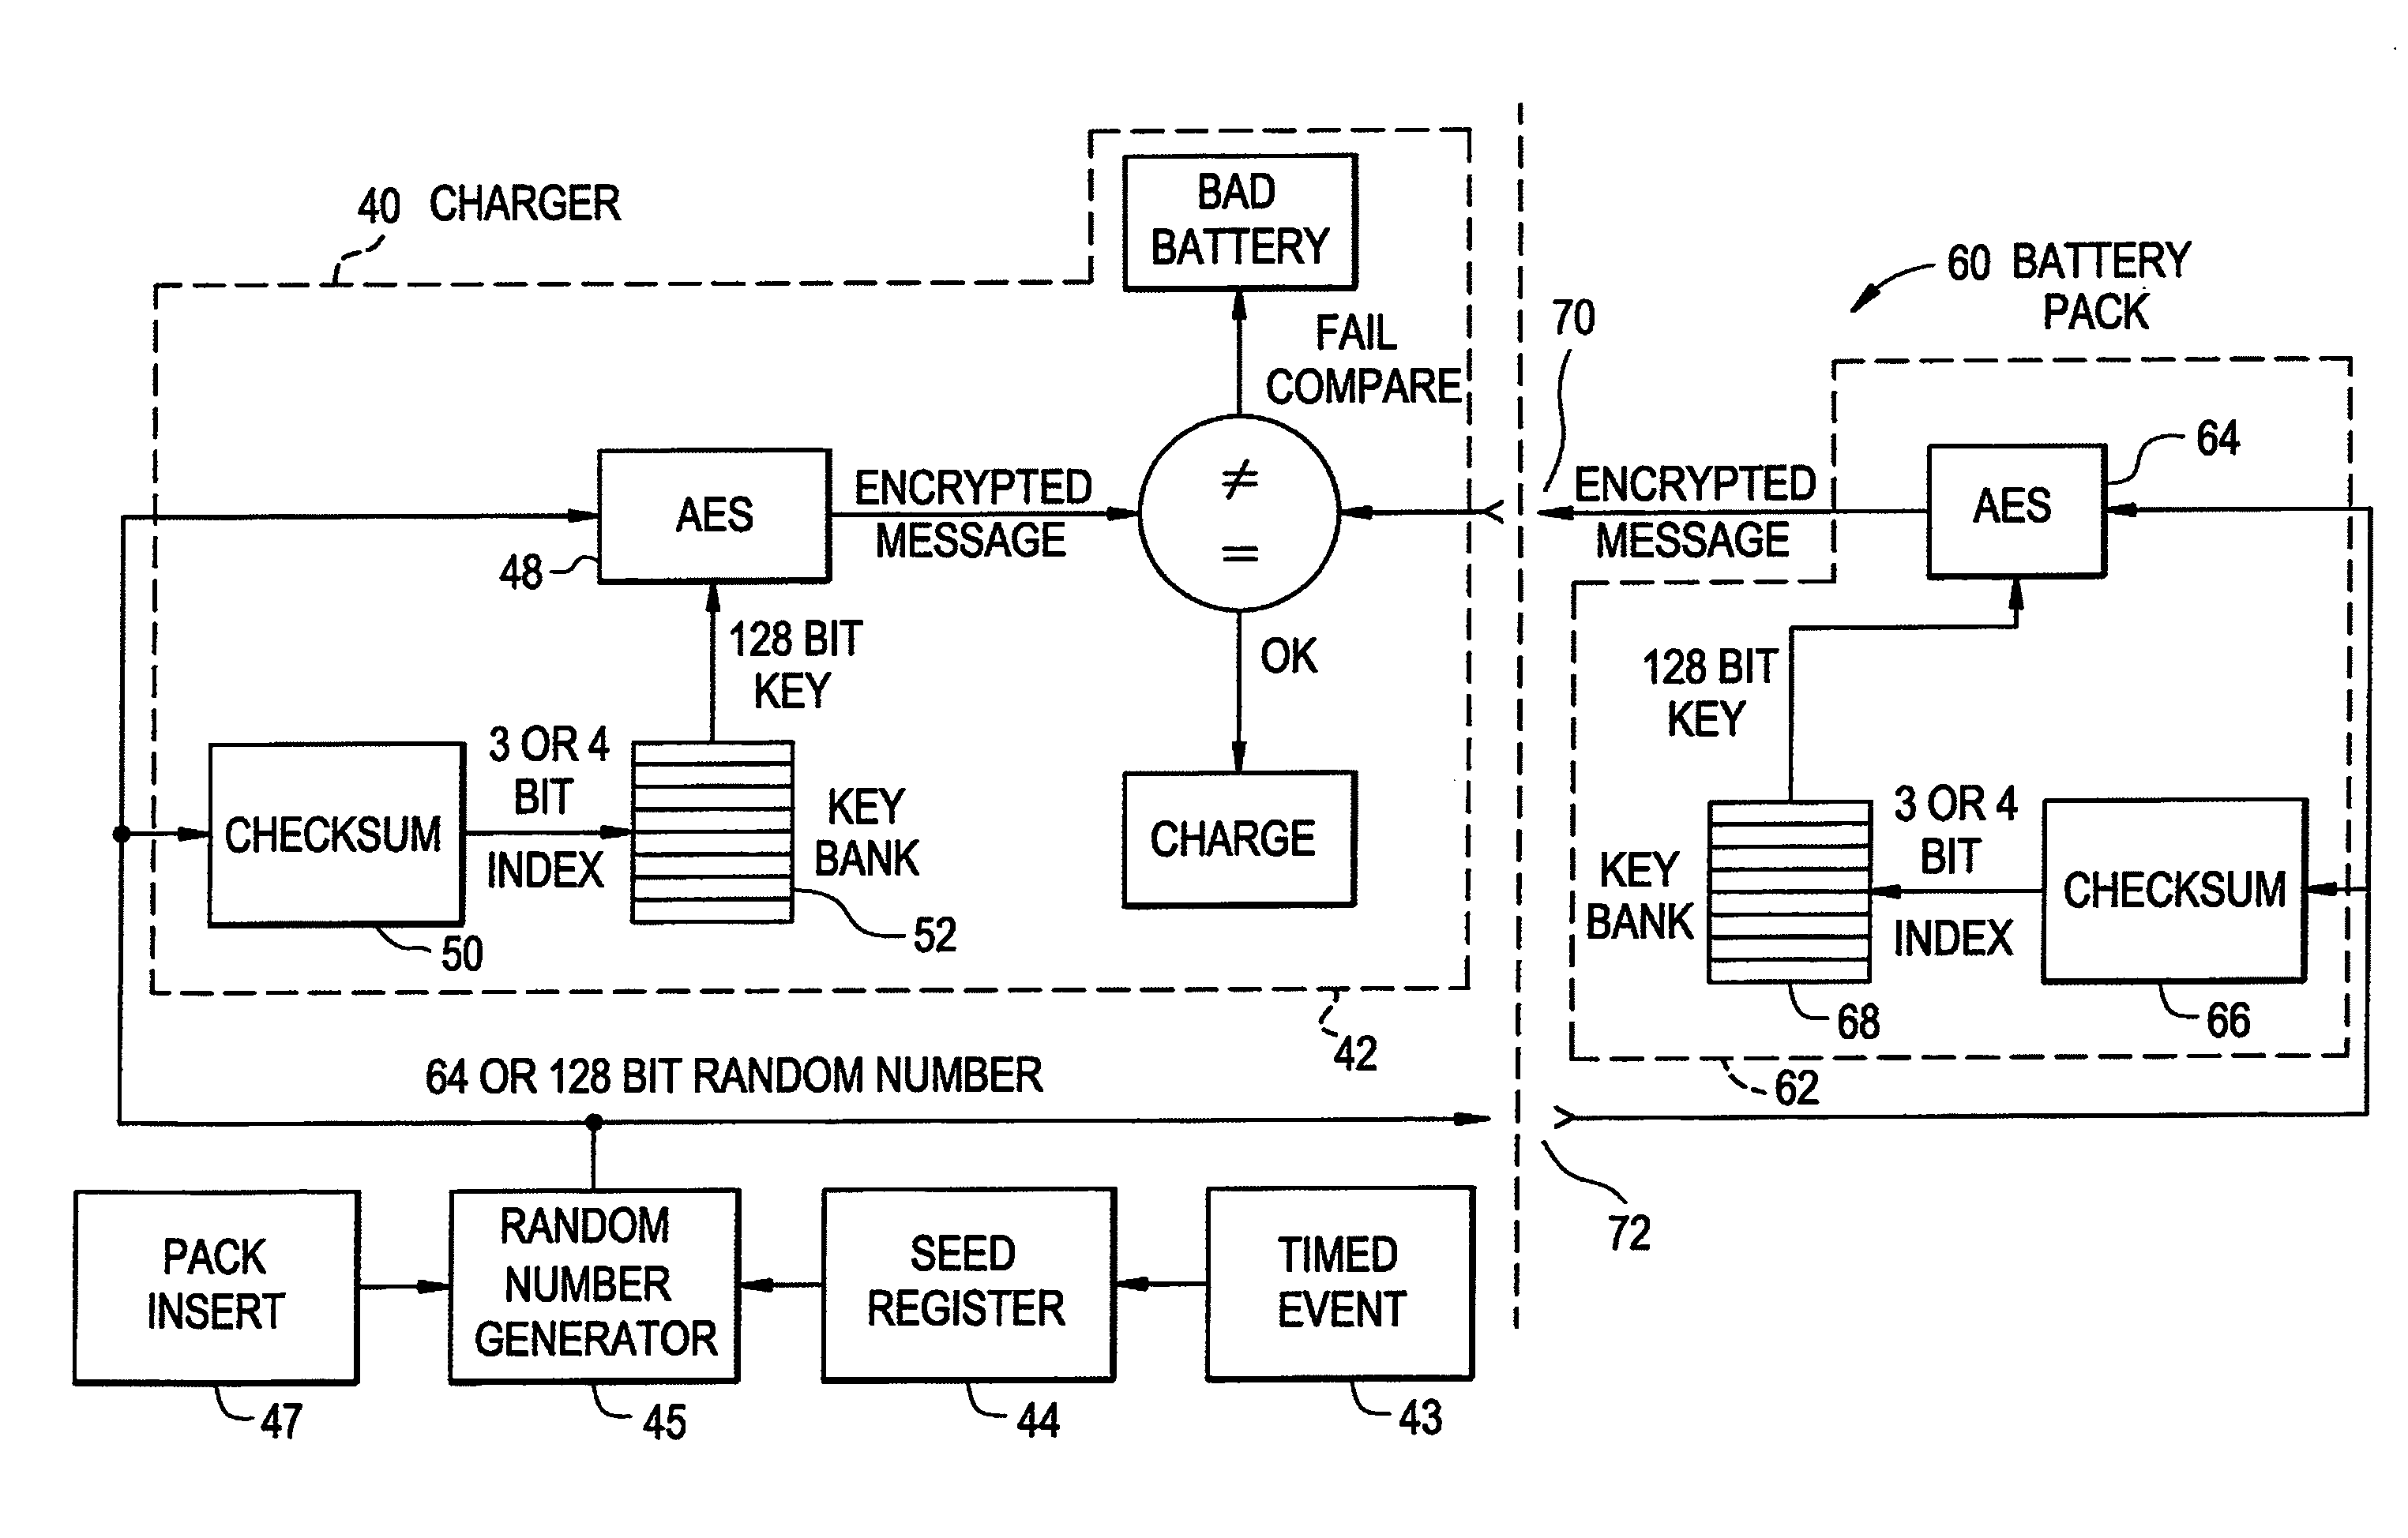 Rechargeable battery pack and operating system